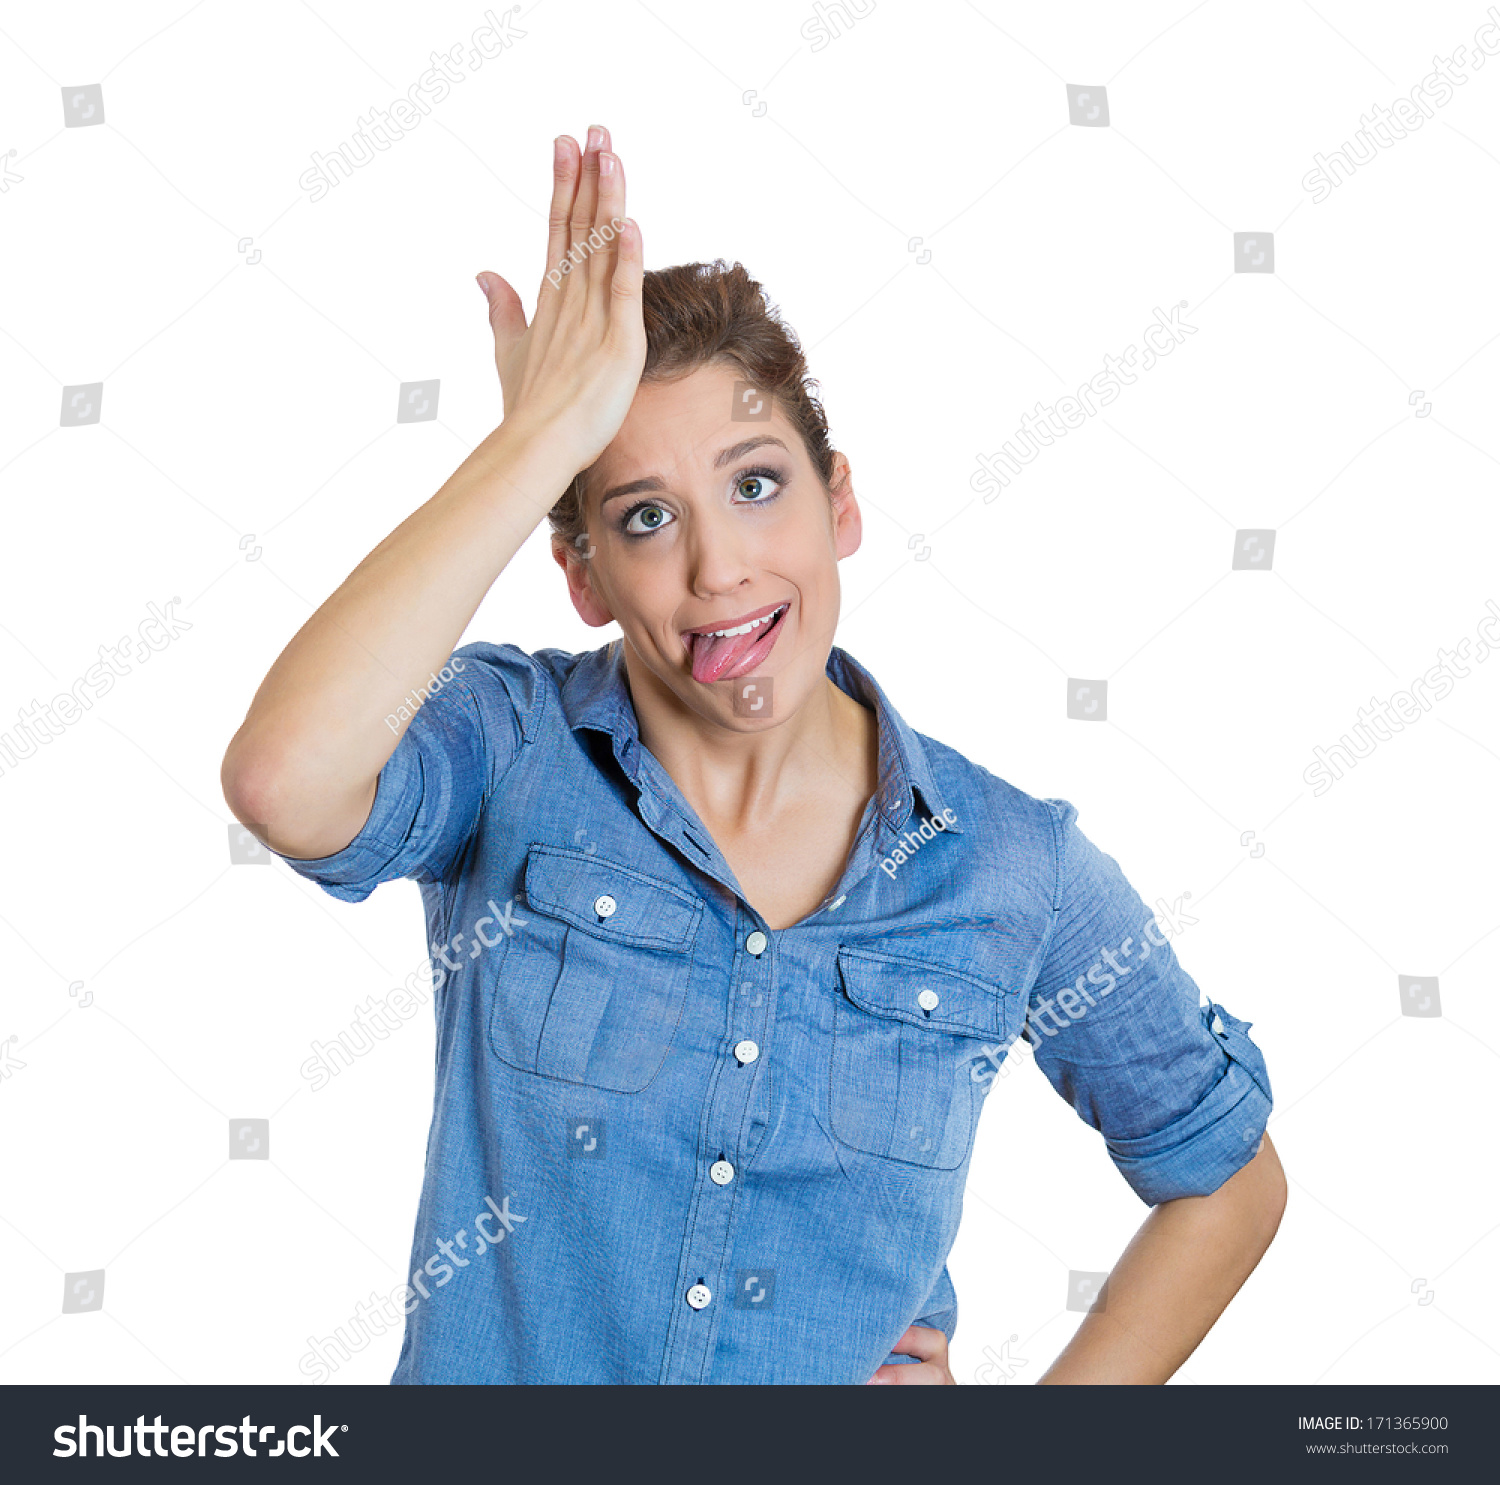 https://image.shutterstock.com/z/stock-photo-closeup-portrait-of-goofy-woman-tongue-sticking-out-slapping-hand-on-head-to-say-duh-isolated-on-171365900.jpg